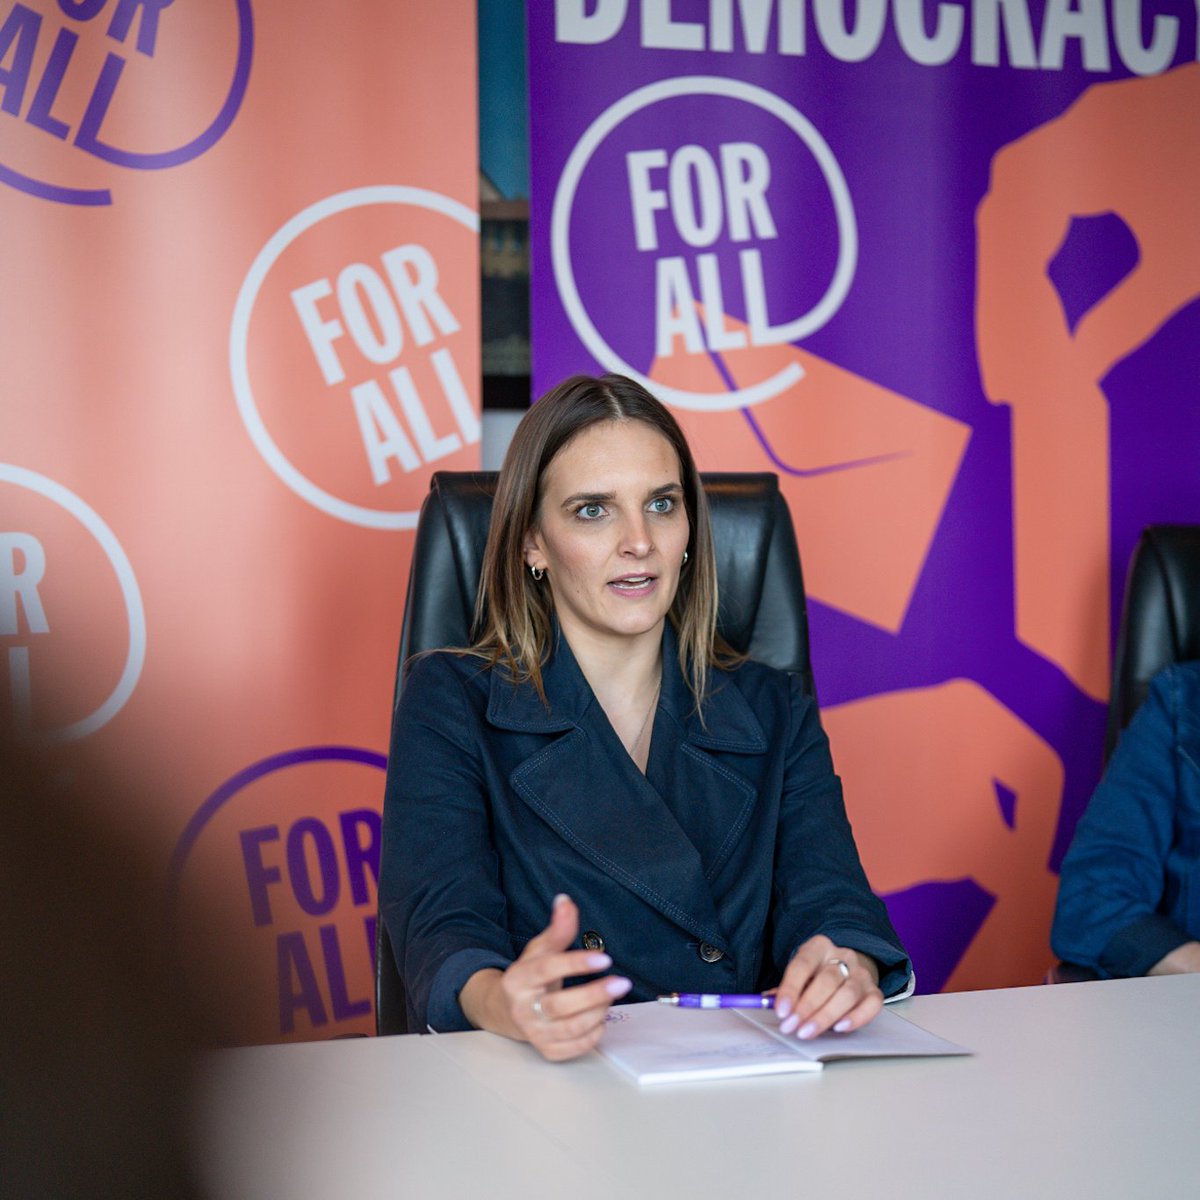 @SSWpresse @lorenalacalleA 'My candidacy as a lead candidate for the Presidency of the EU Commission is not symbolic at all. Without our participation, topics such as minorities or diversity would not even be mentioned by the other European political parties'. - @RoMaylis, EFA Spitzenkandidatin.